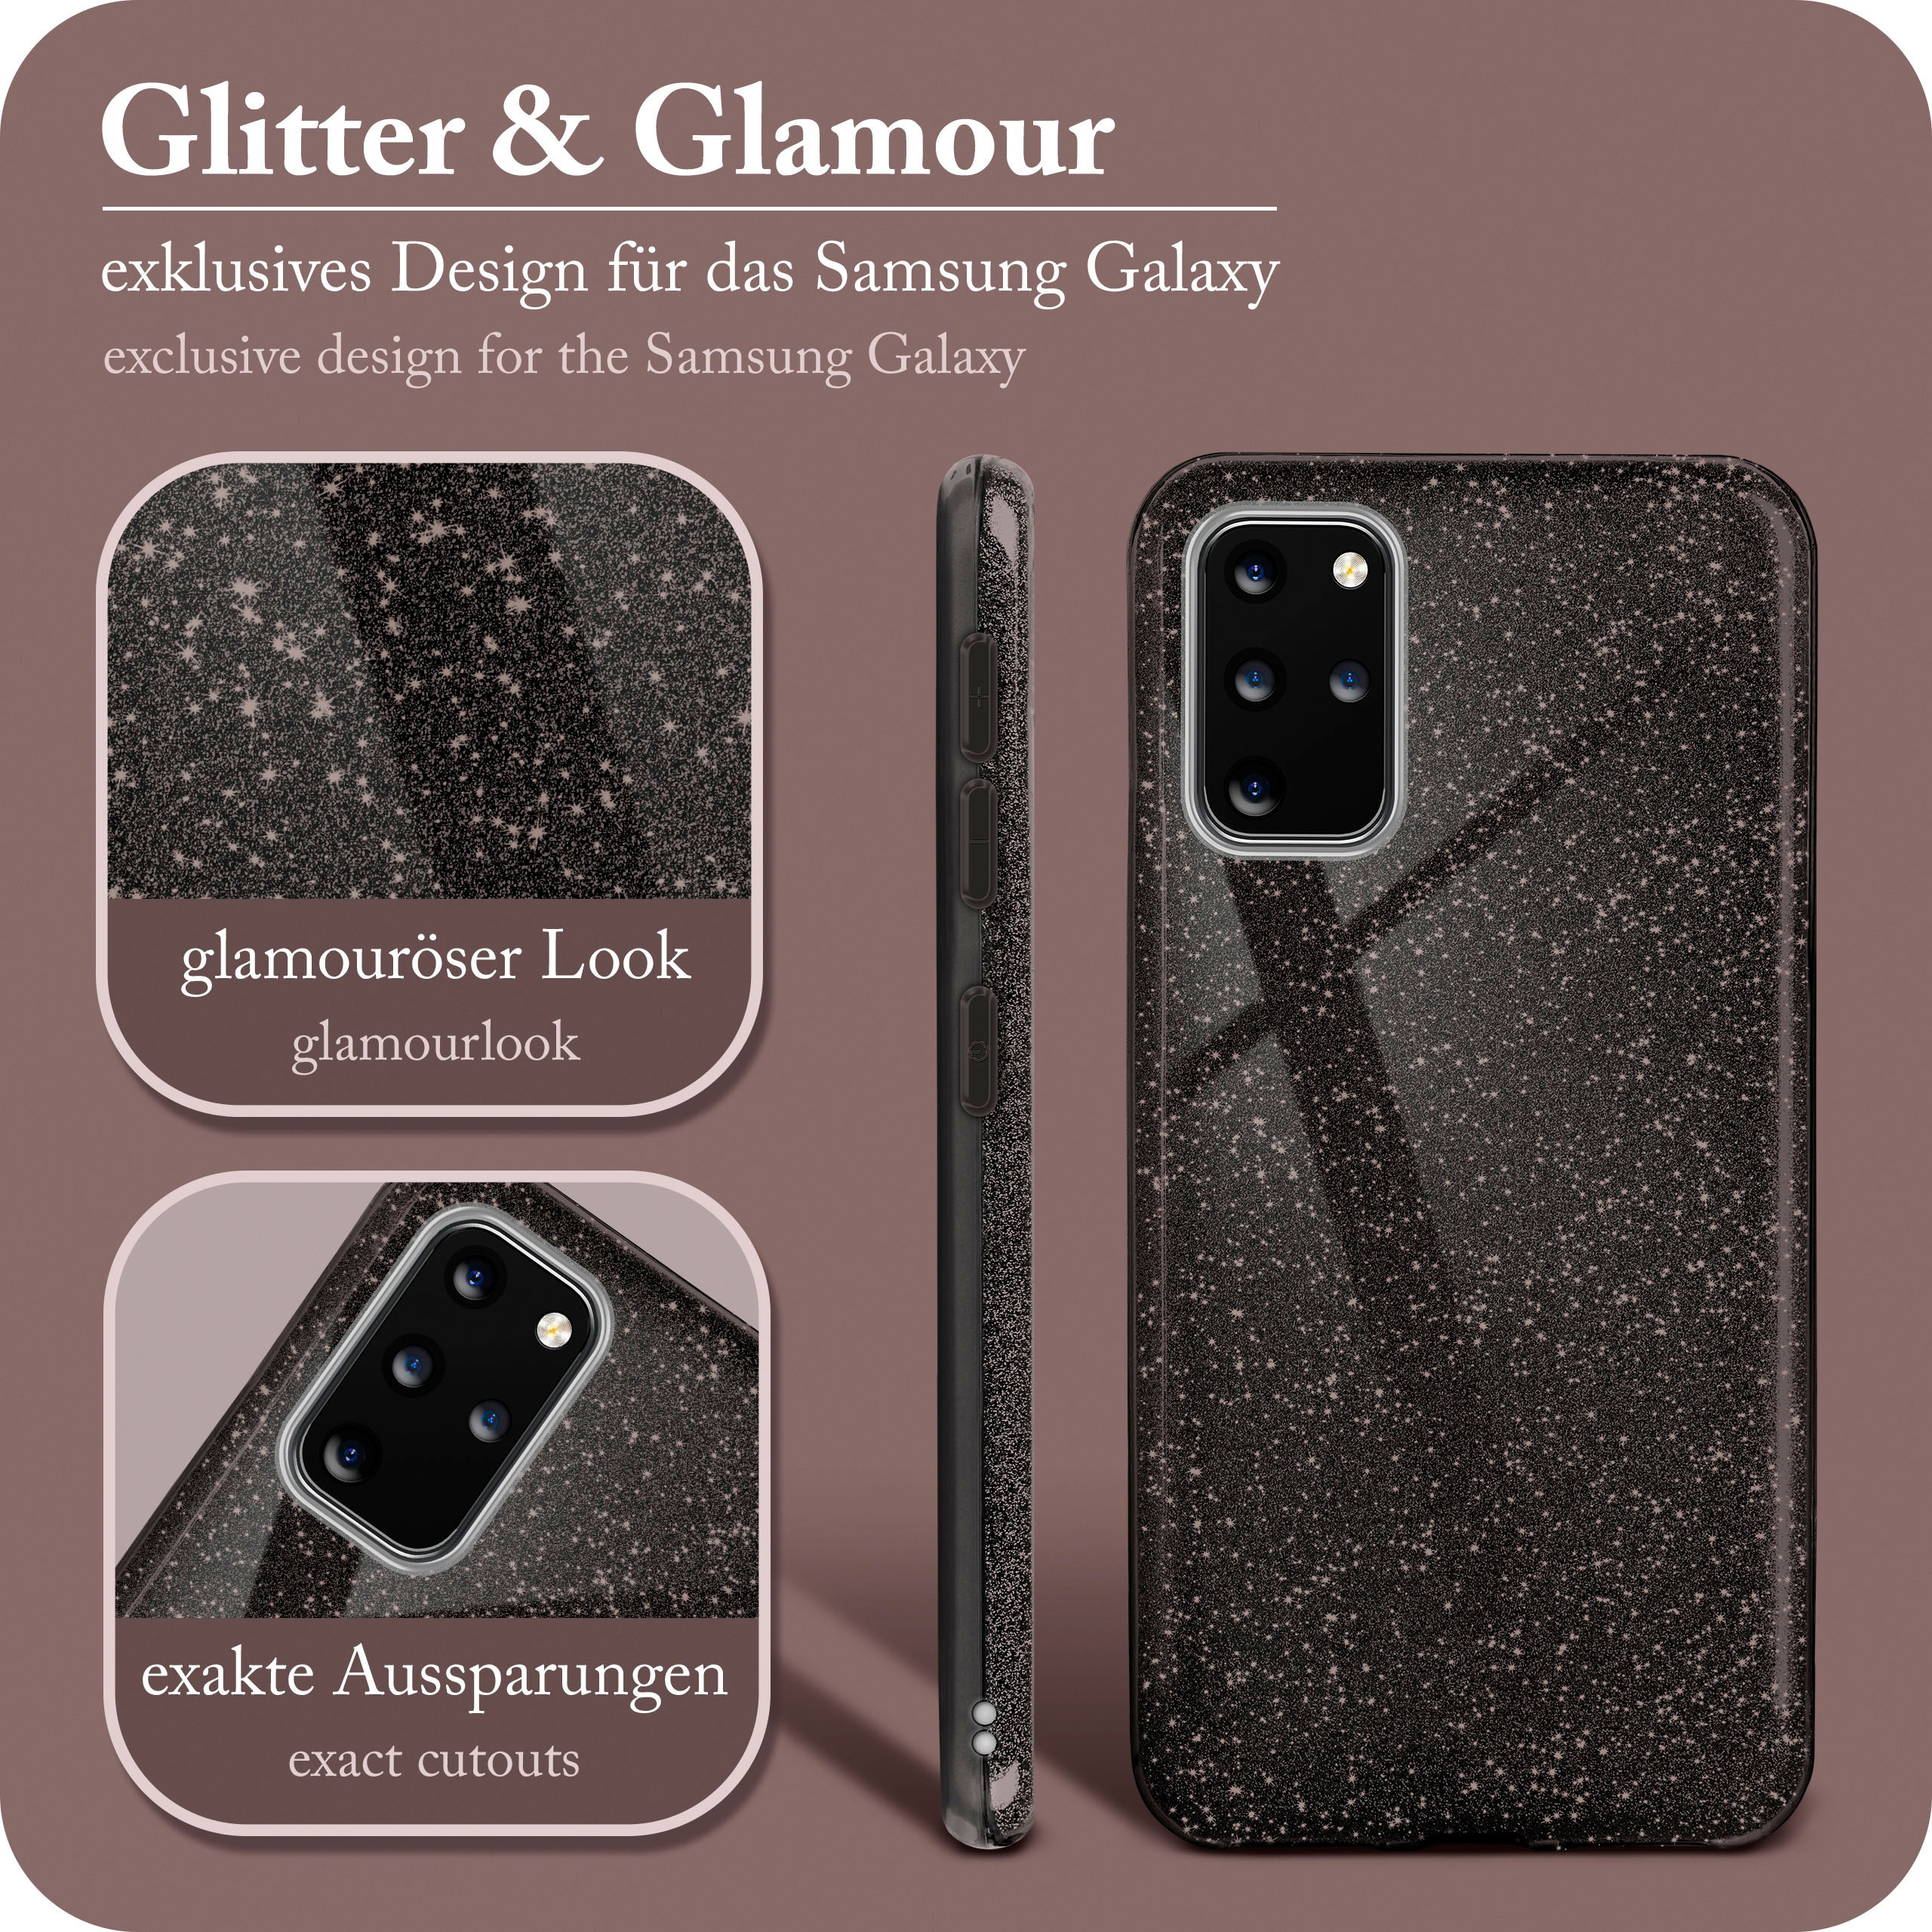 / S20 Plus Glamour - 5G, Samsung, Case, ONEFLOW Backcover, Galaxy Glitter Black